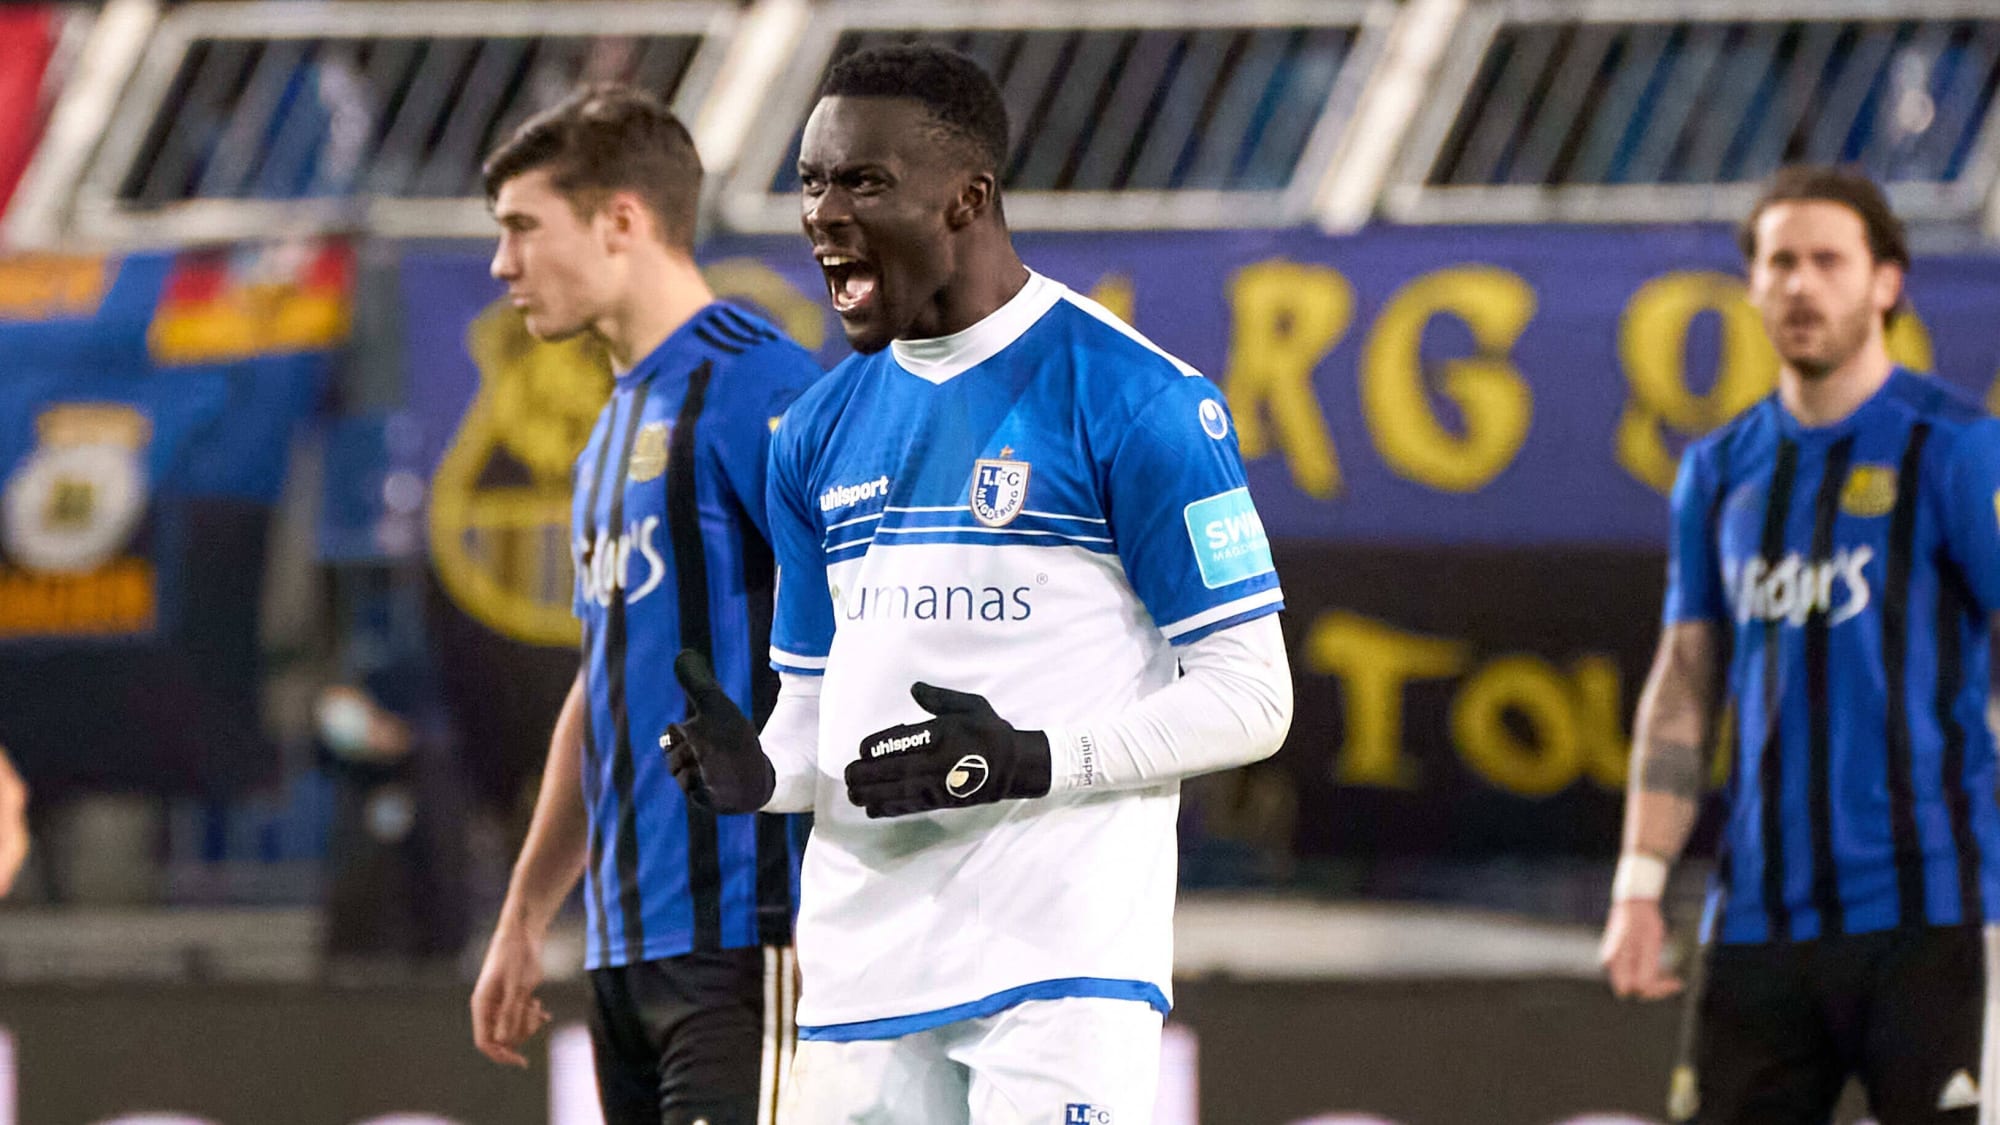 Sirlord Conteh (1. FC Magdeburg)